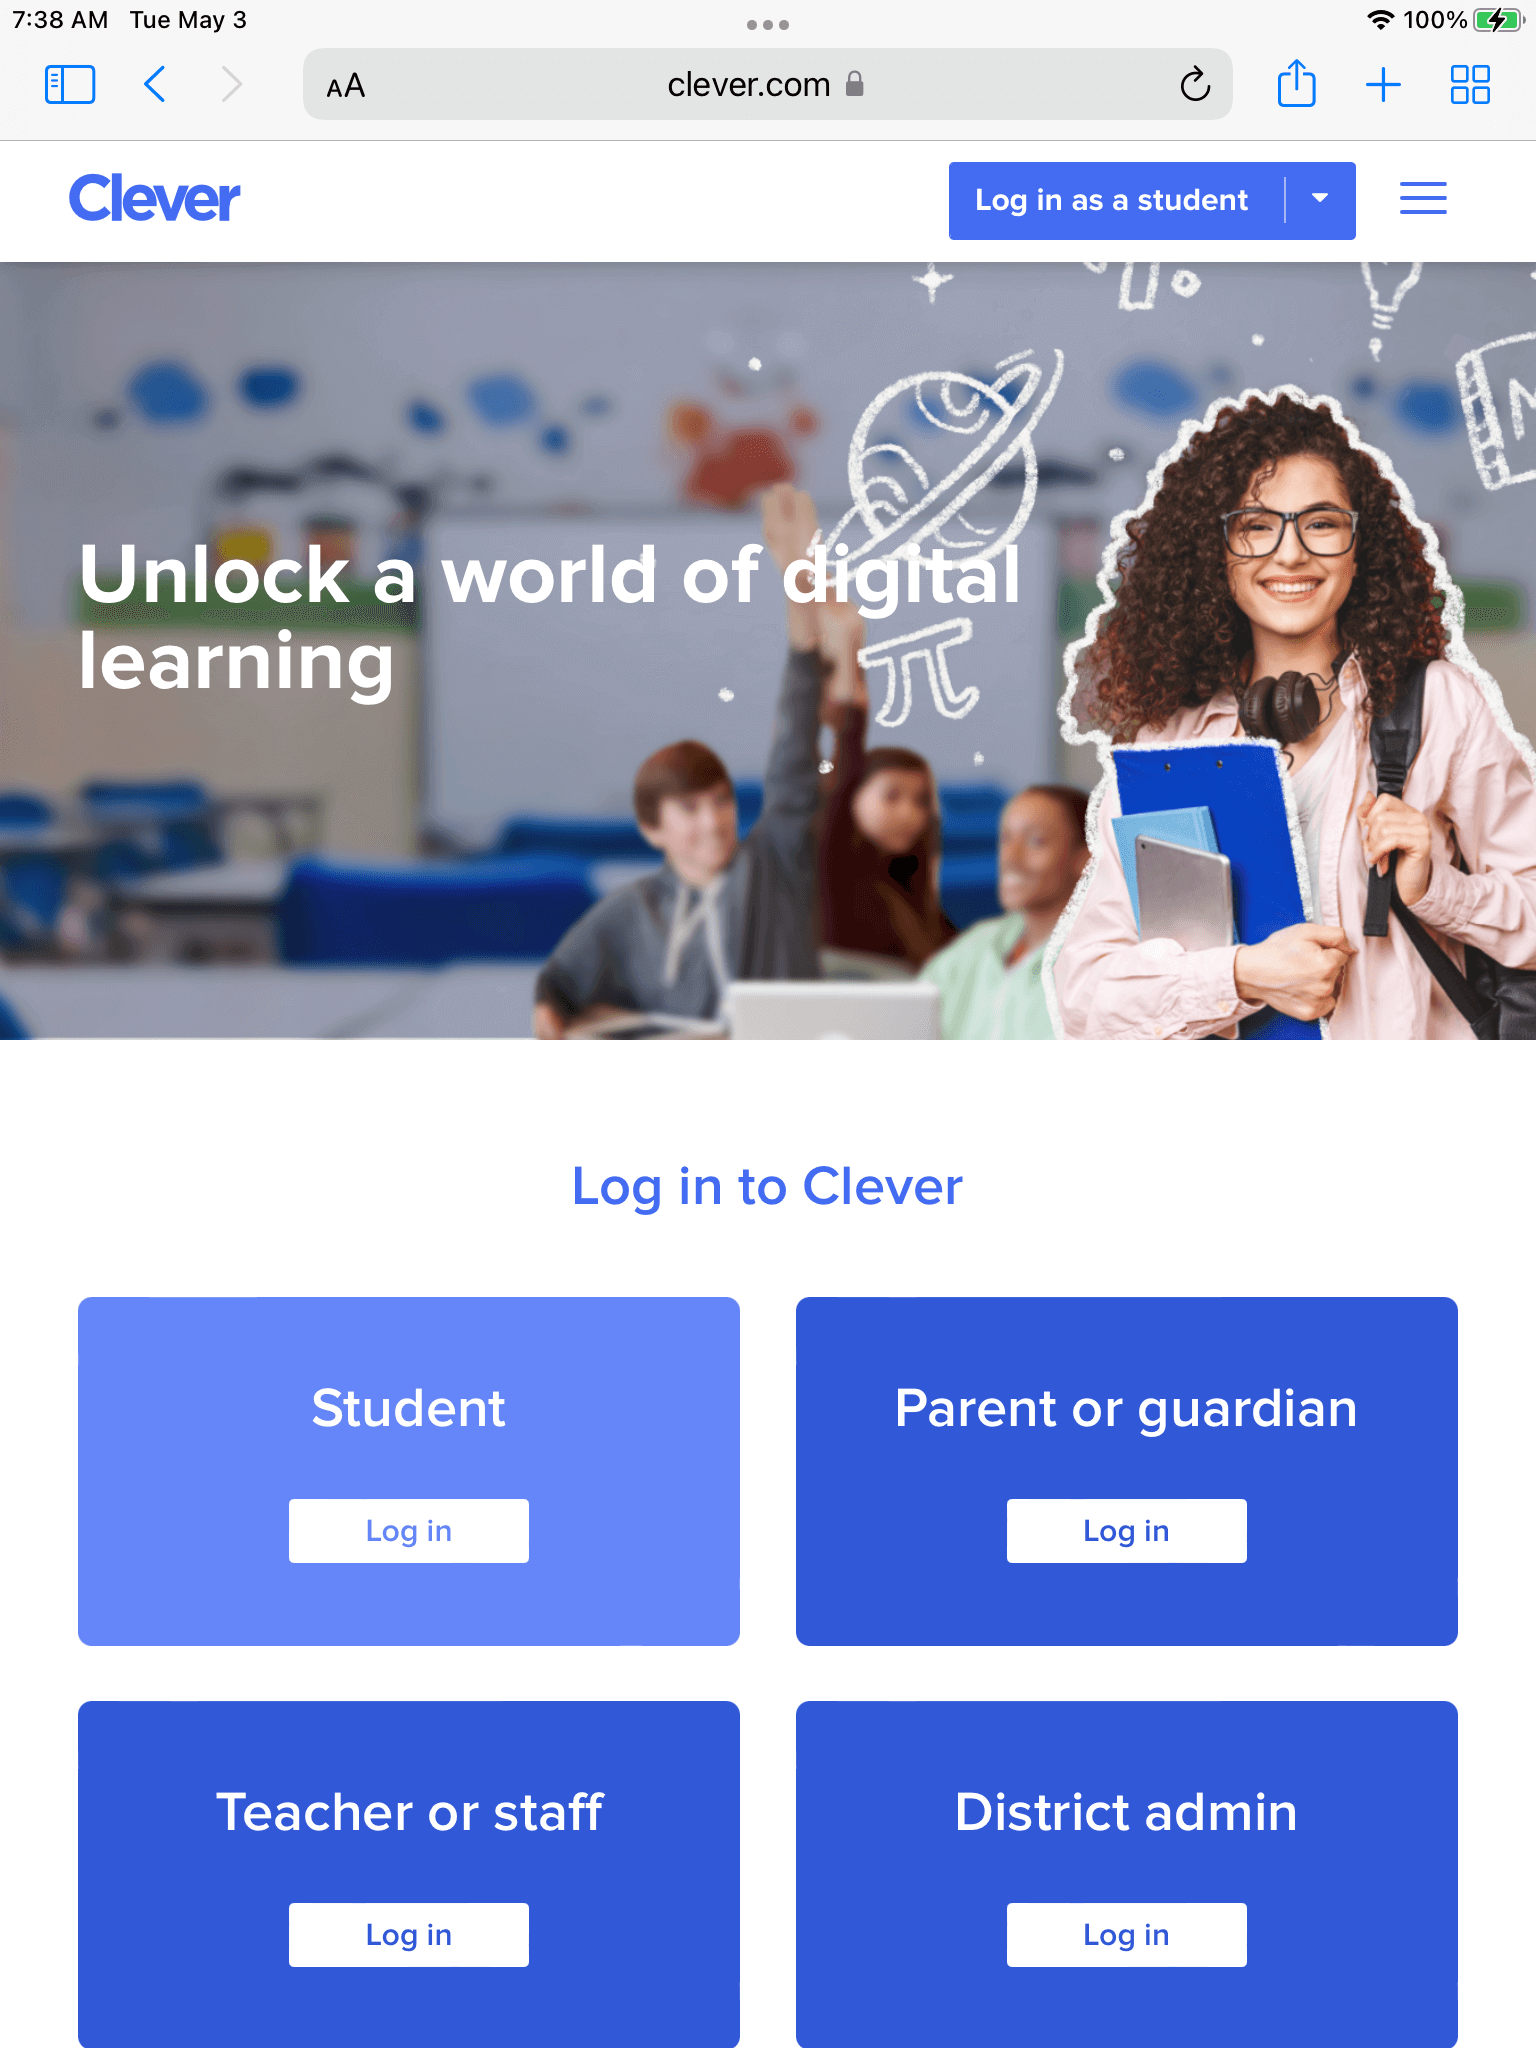 Screenshot of the Clever.com homepage